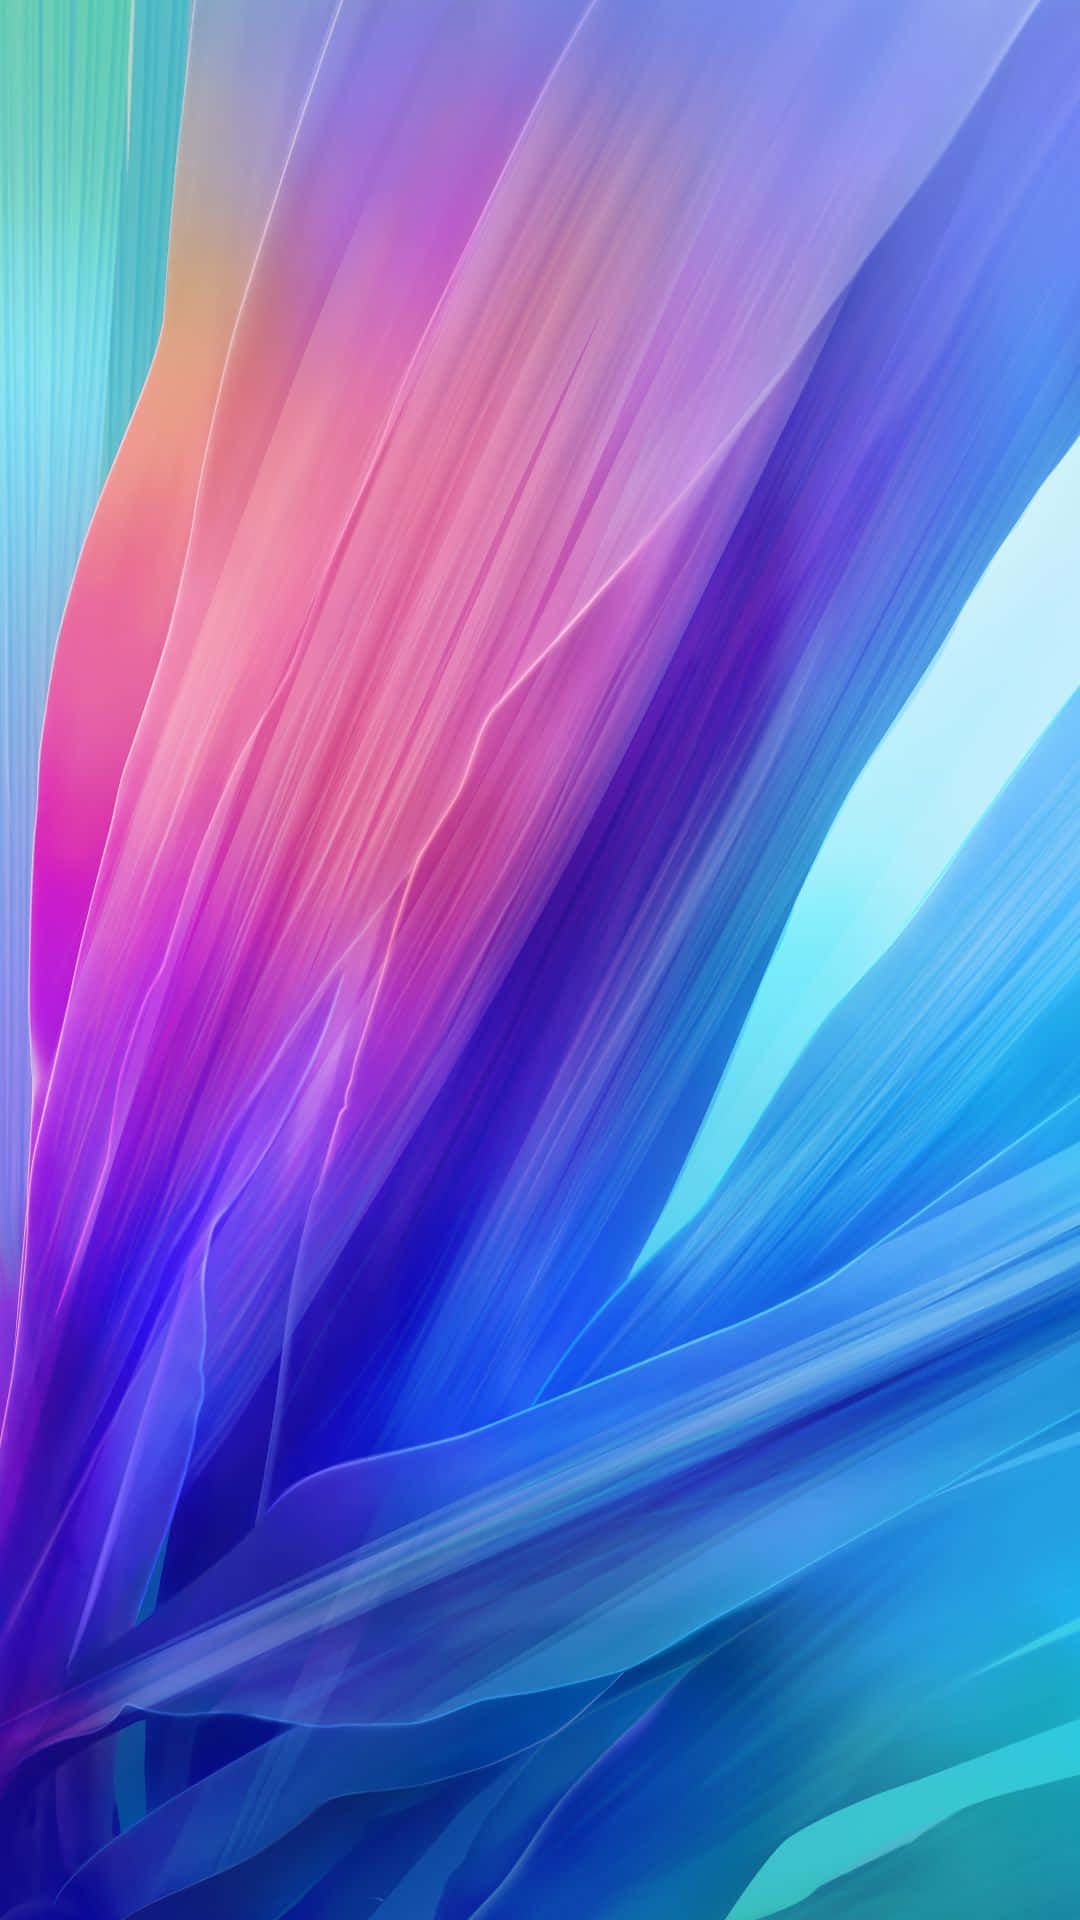 Get the Latest Apple iPhone 7 Plus Wallpaper